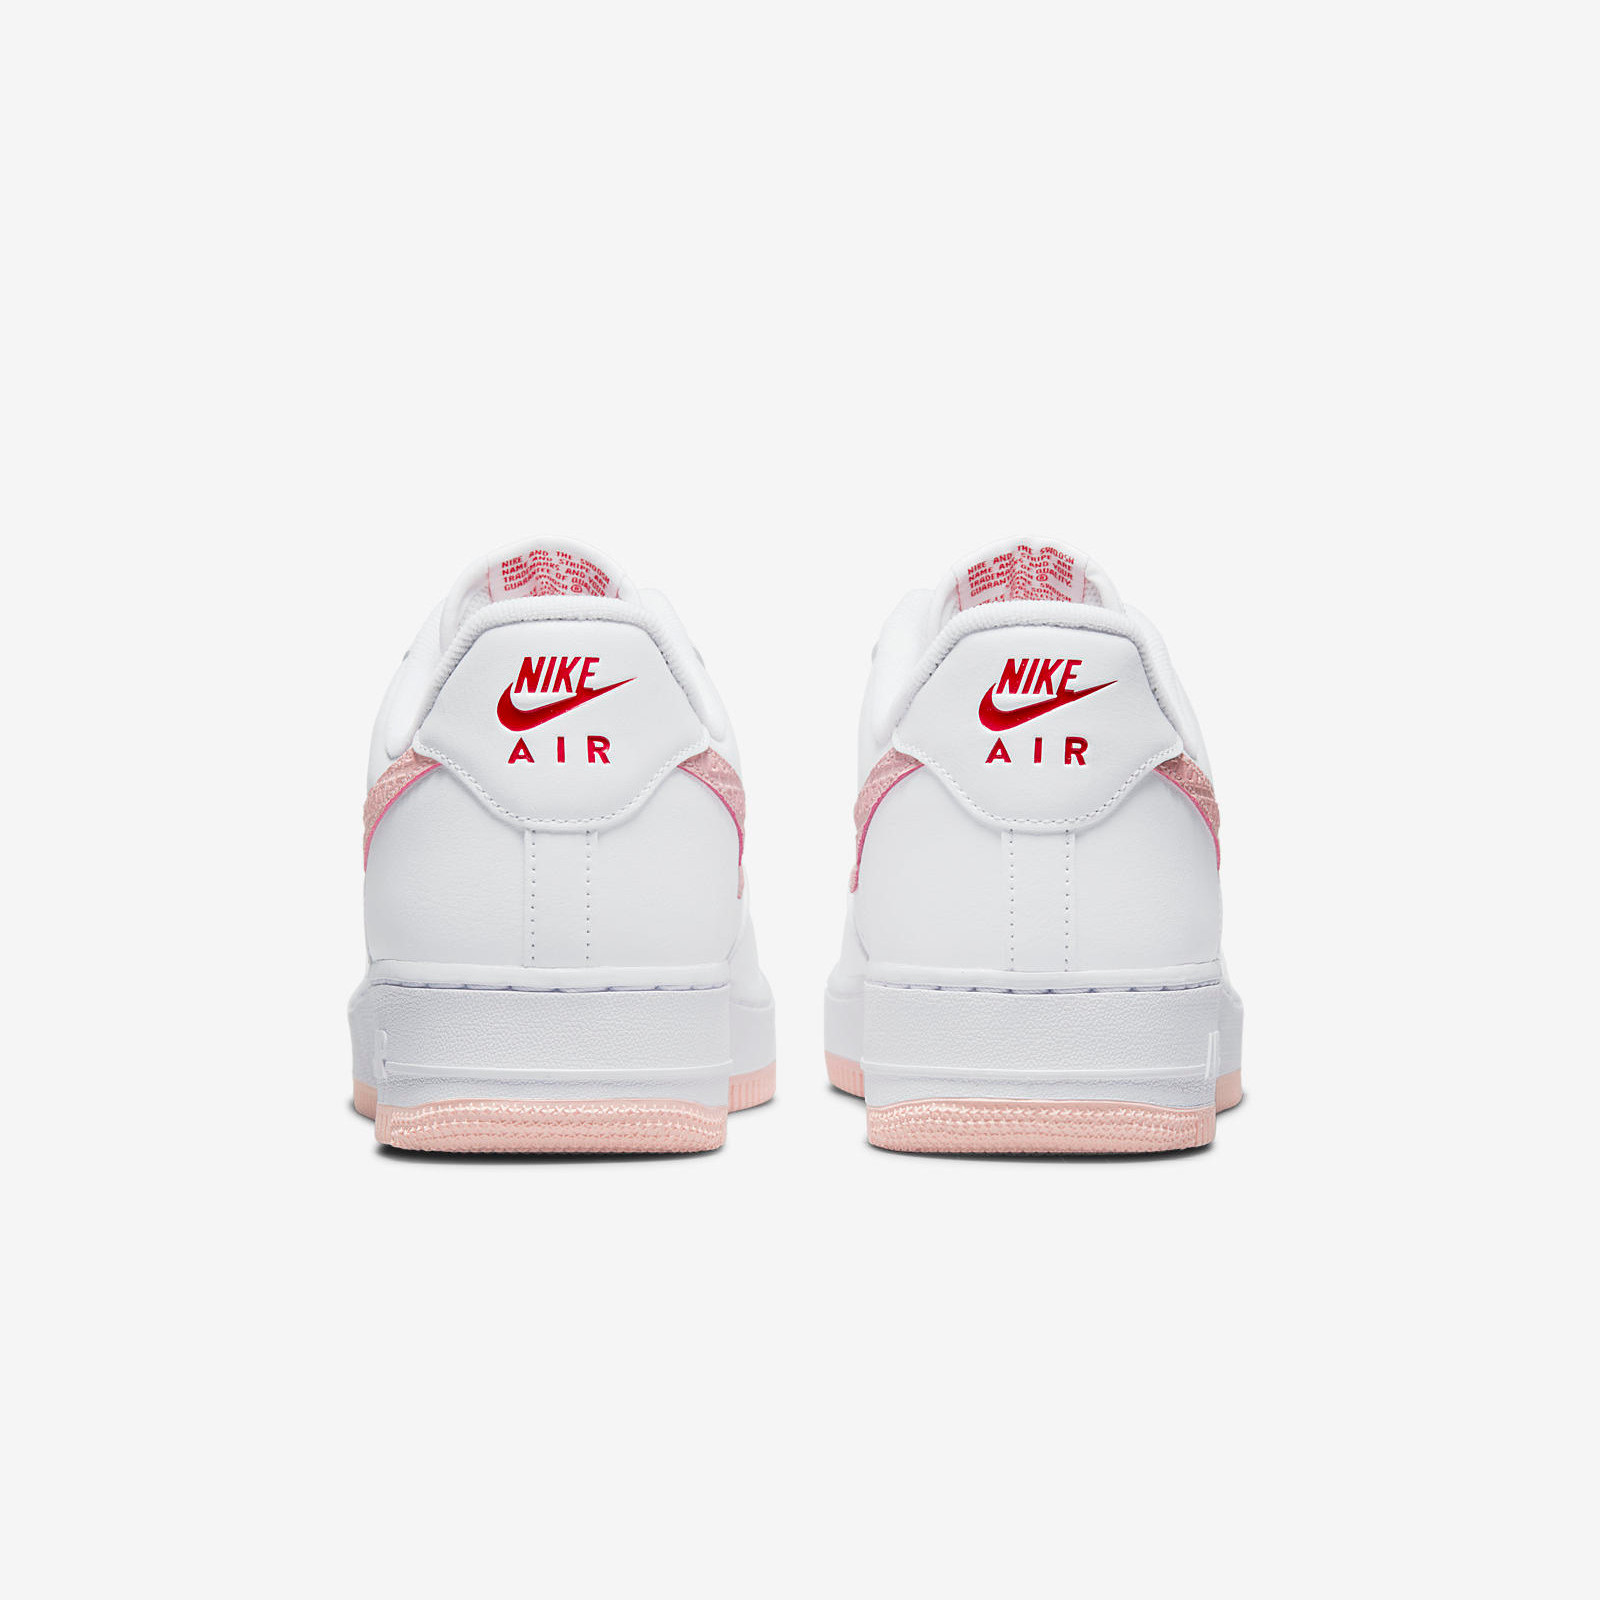 Nike Air Force 1 Low
« Valentines Day »